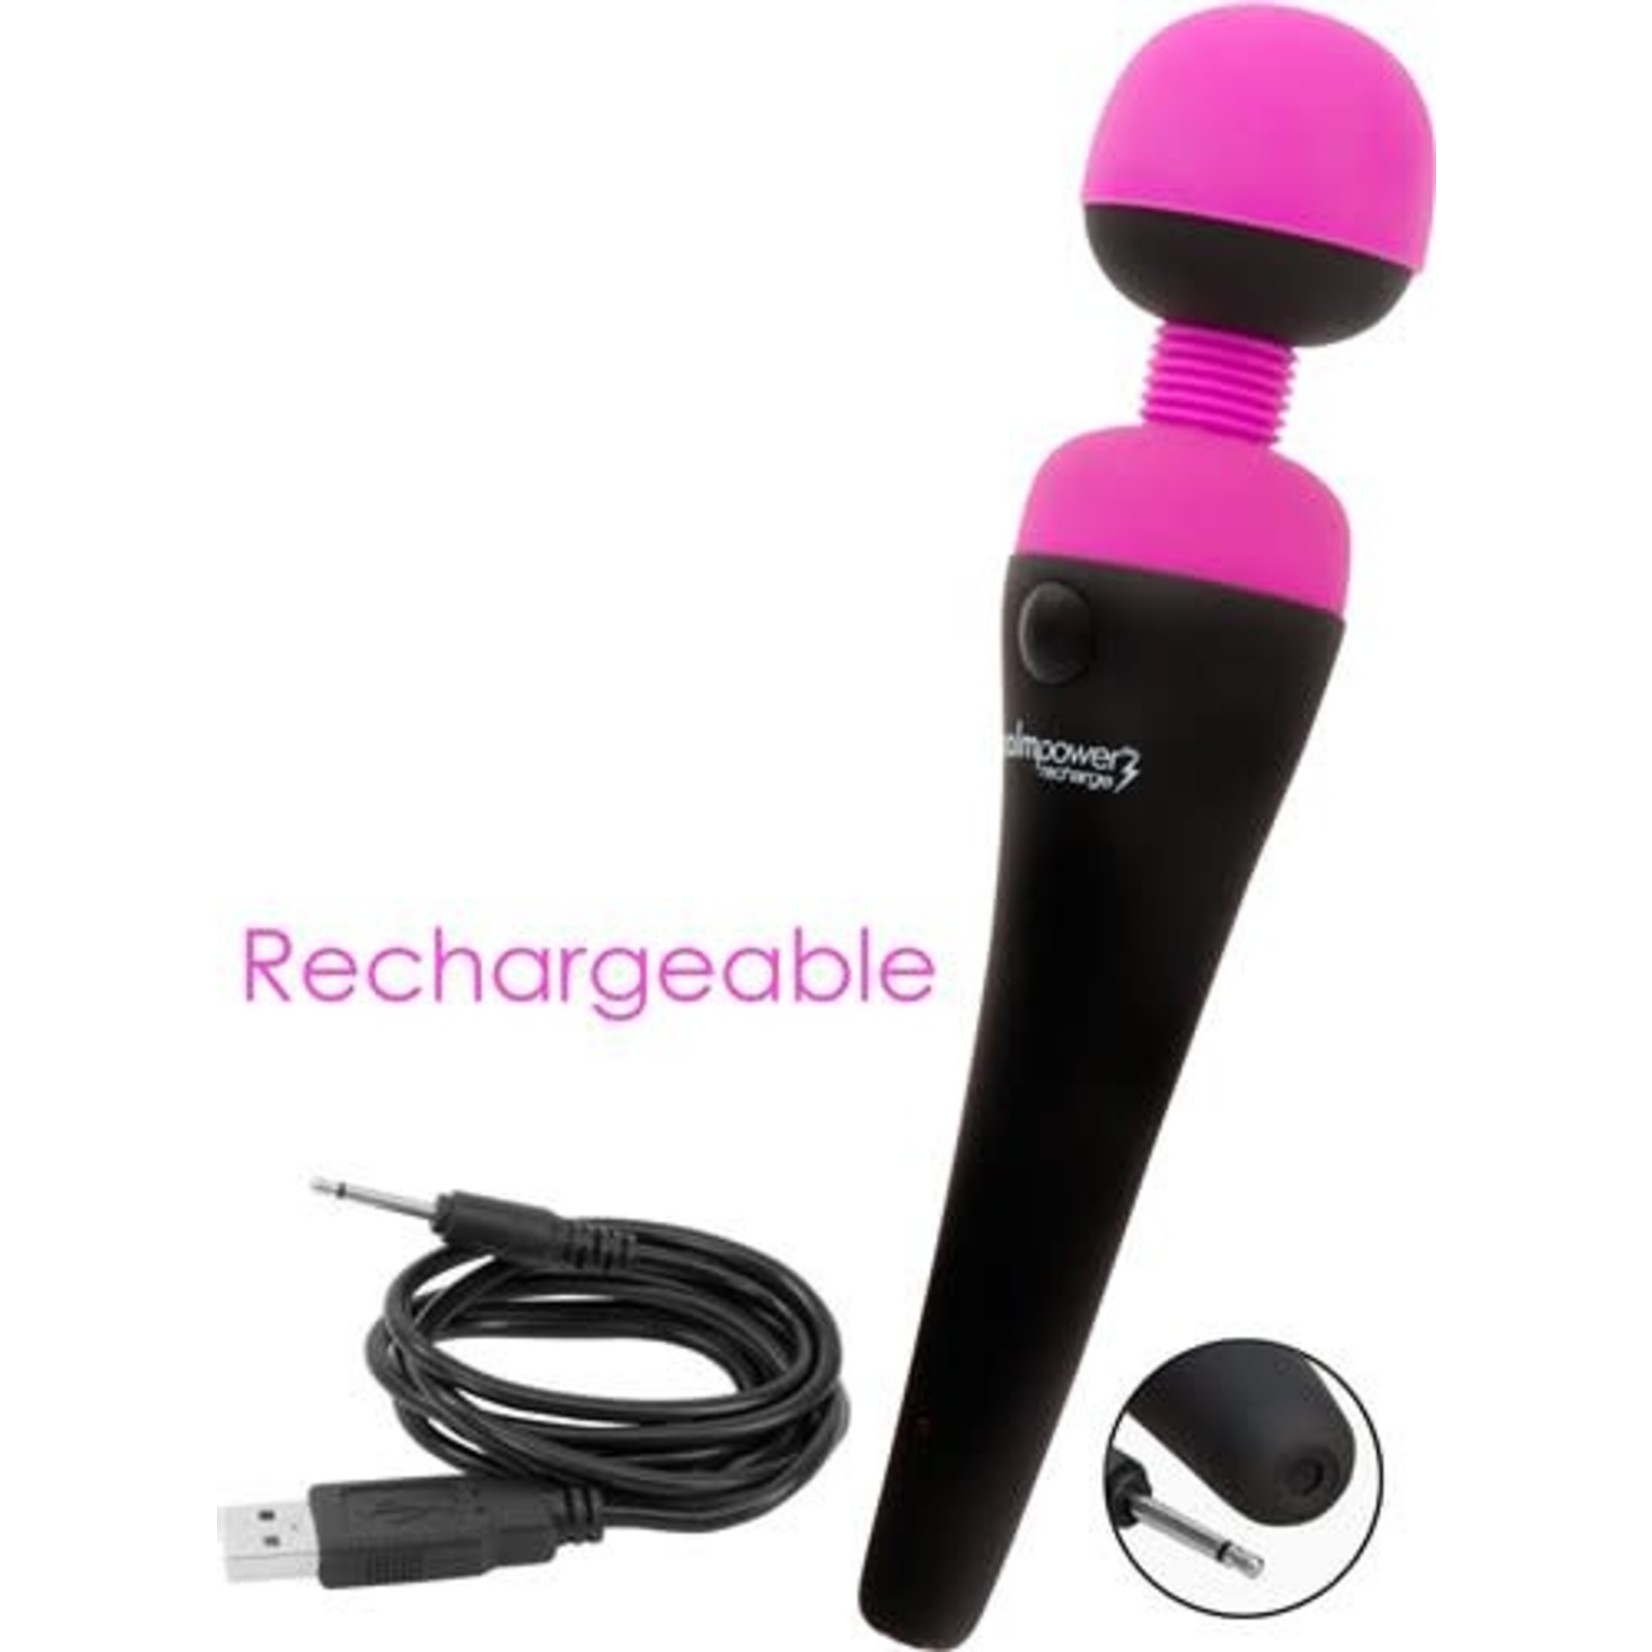 PALMPOWER RECHARGE WATERPROOF PERSONAL MASSAGER